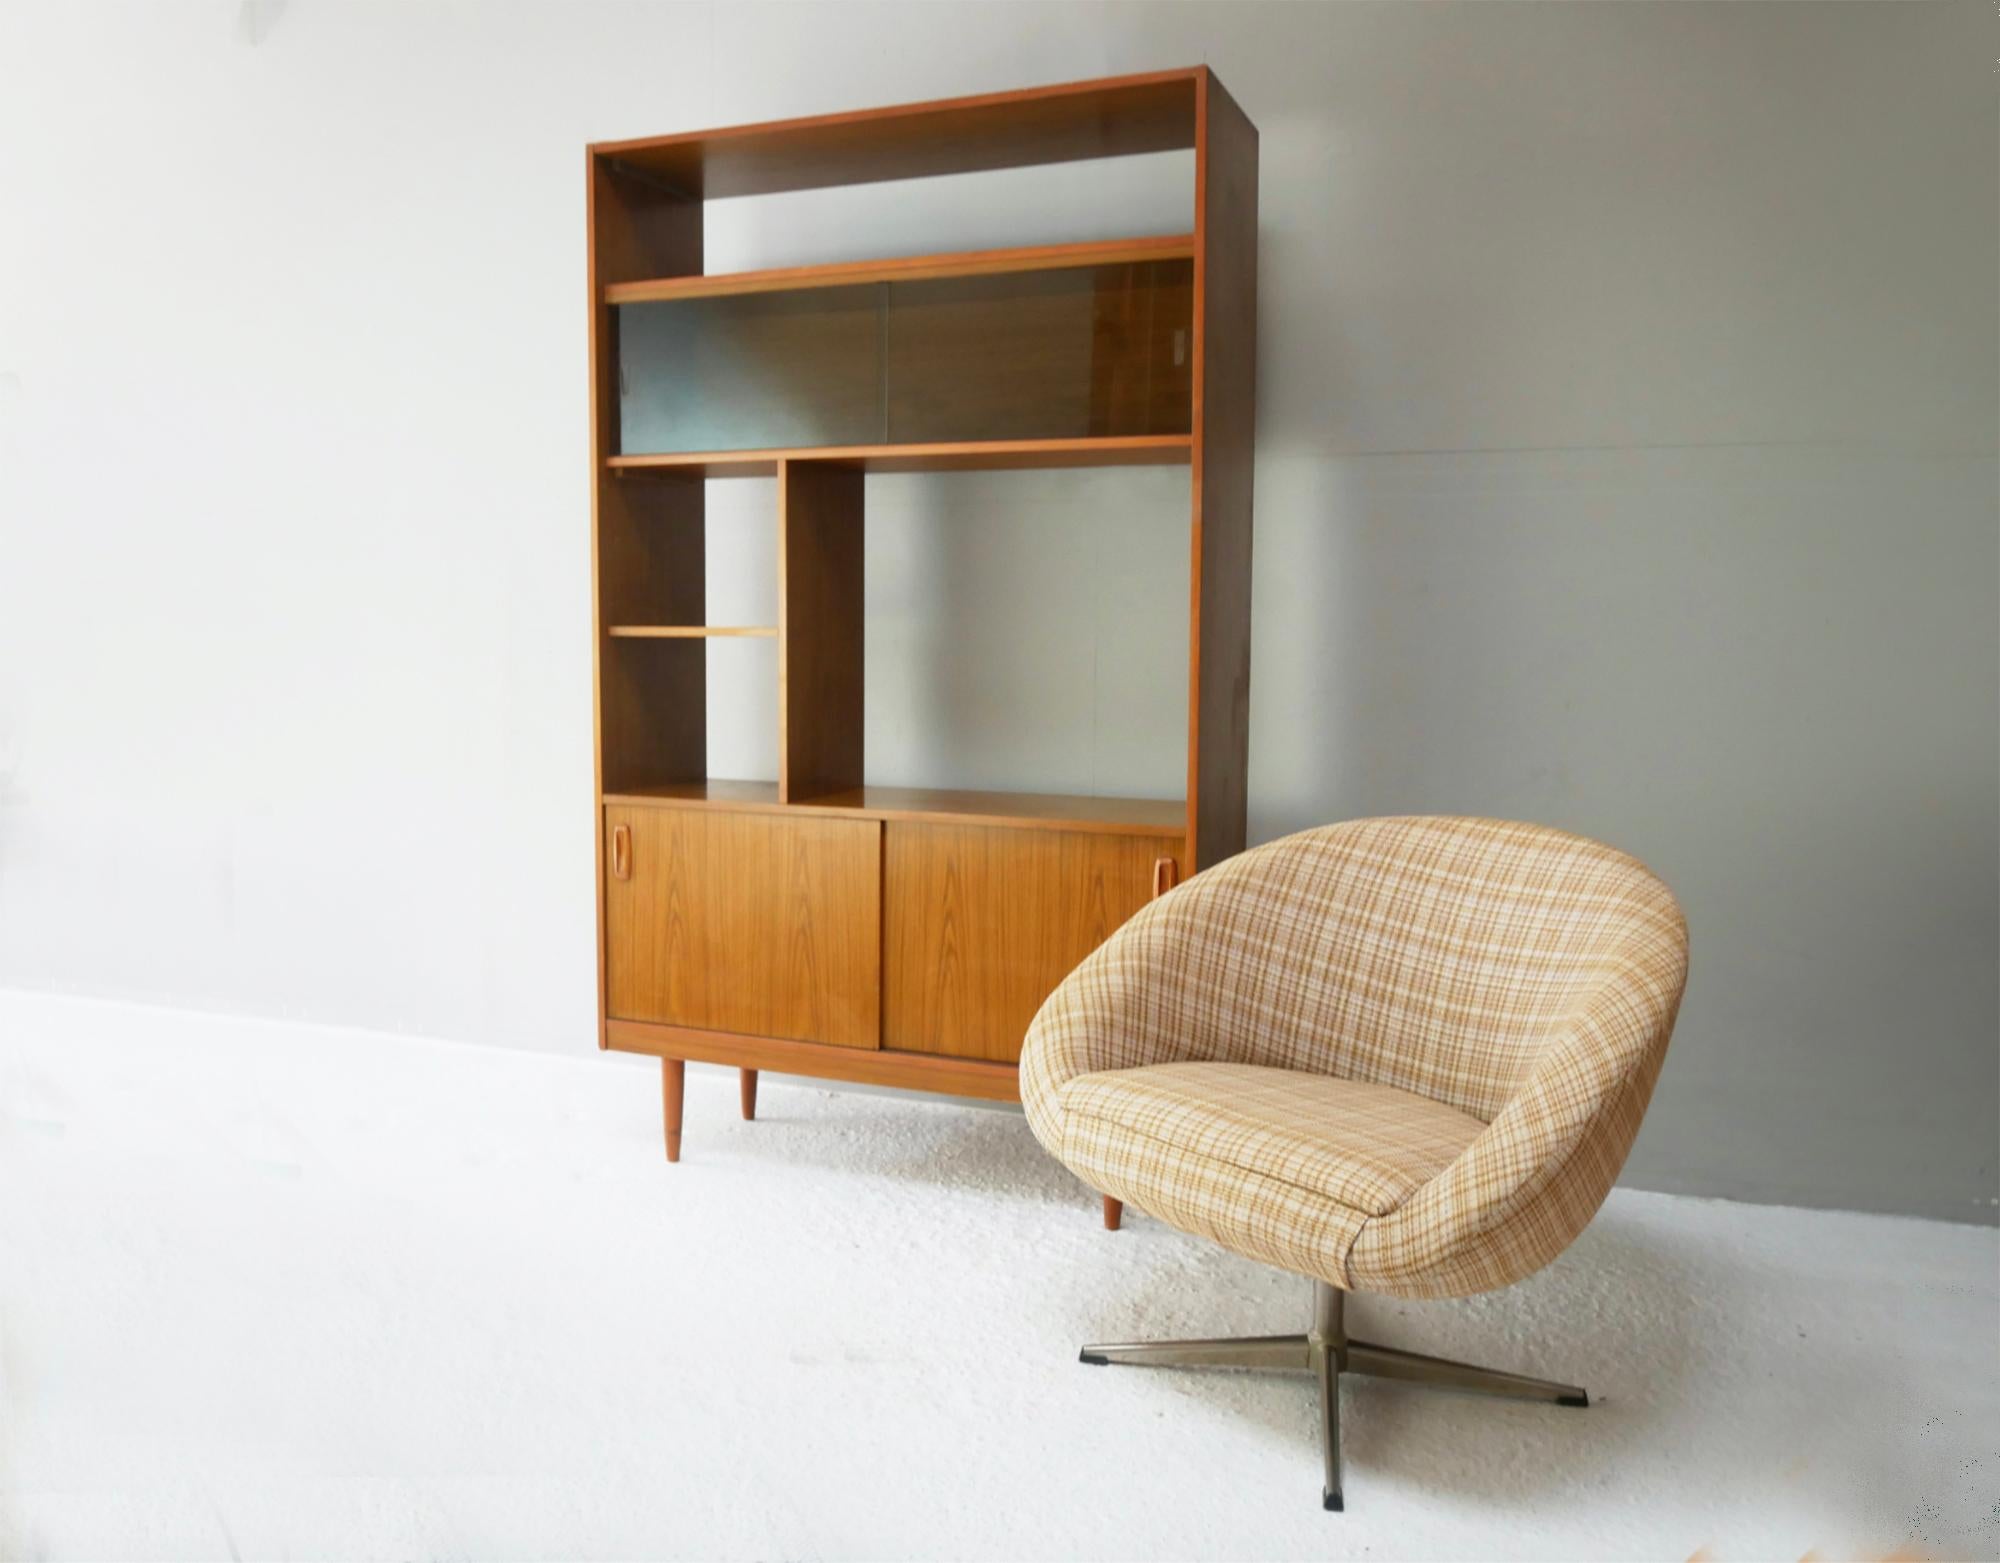 Founded in 1957 by Chaim Schreiber, Schreiber furniture is an interesting British success story. 

The Company was one of the biggest names in furniture in the 70s, rivalling G Plan E Gomme and other famous names.

In 1973 they added fitted